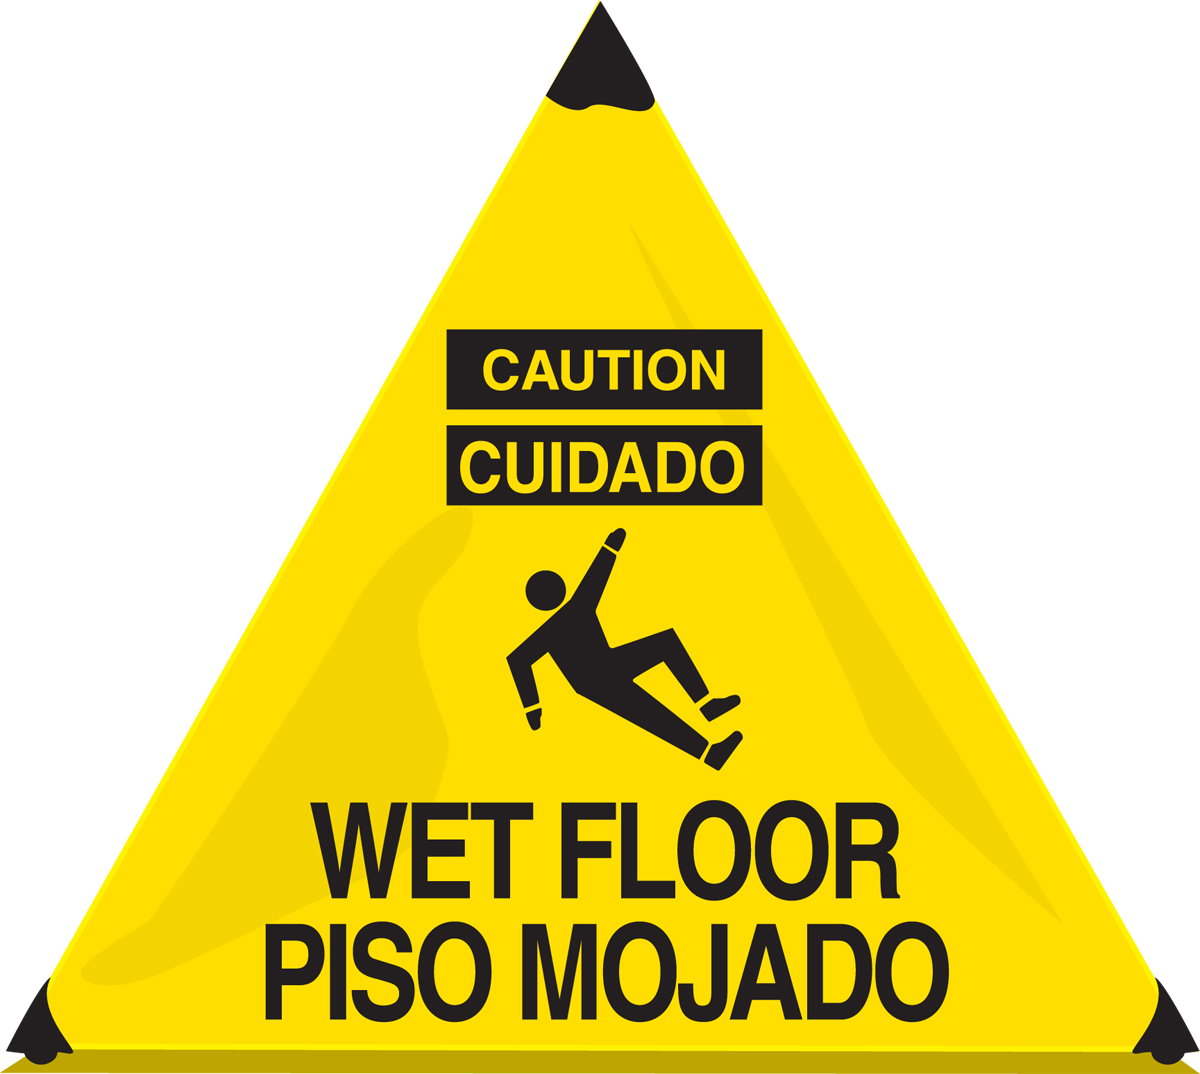 Wet Floor & Caution Multilingual Safety Warning Cone Sign Visibility Sign 